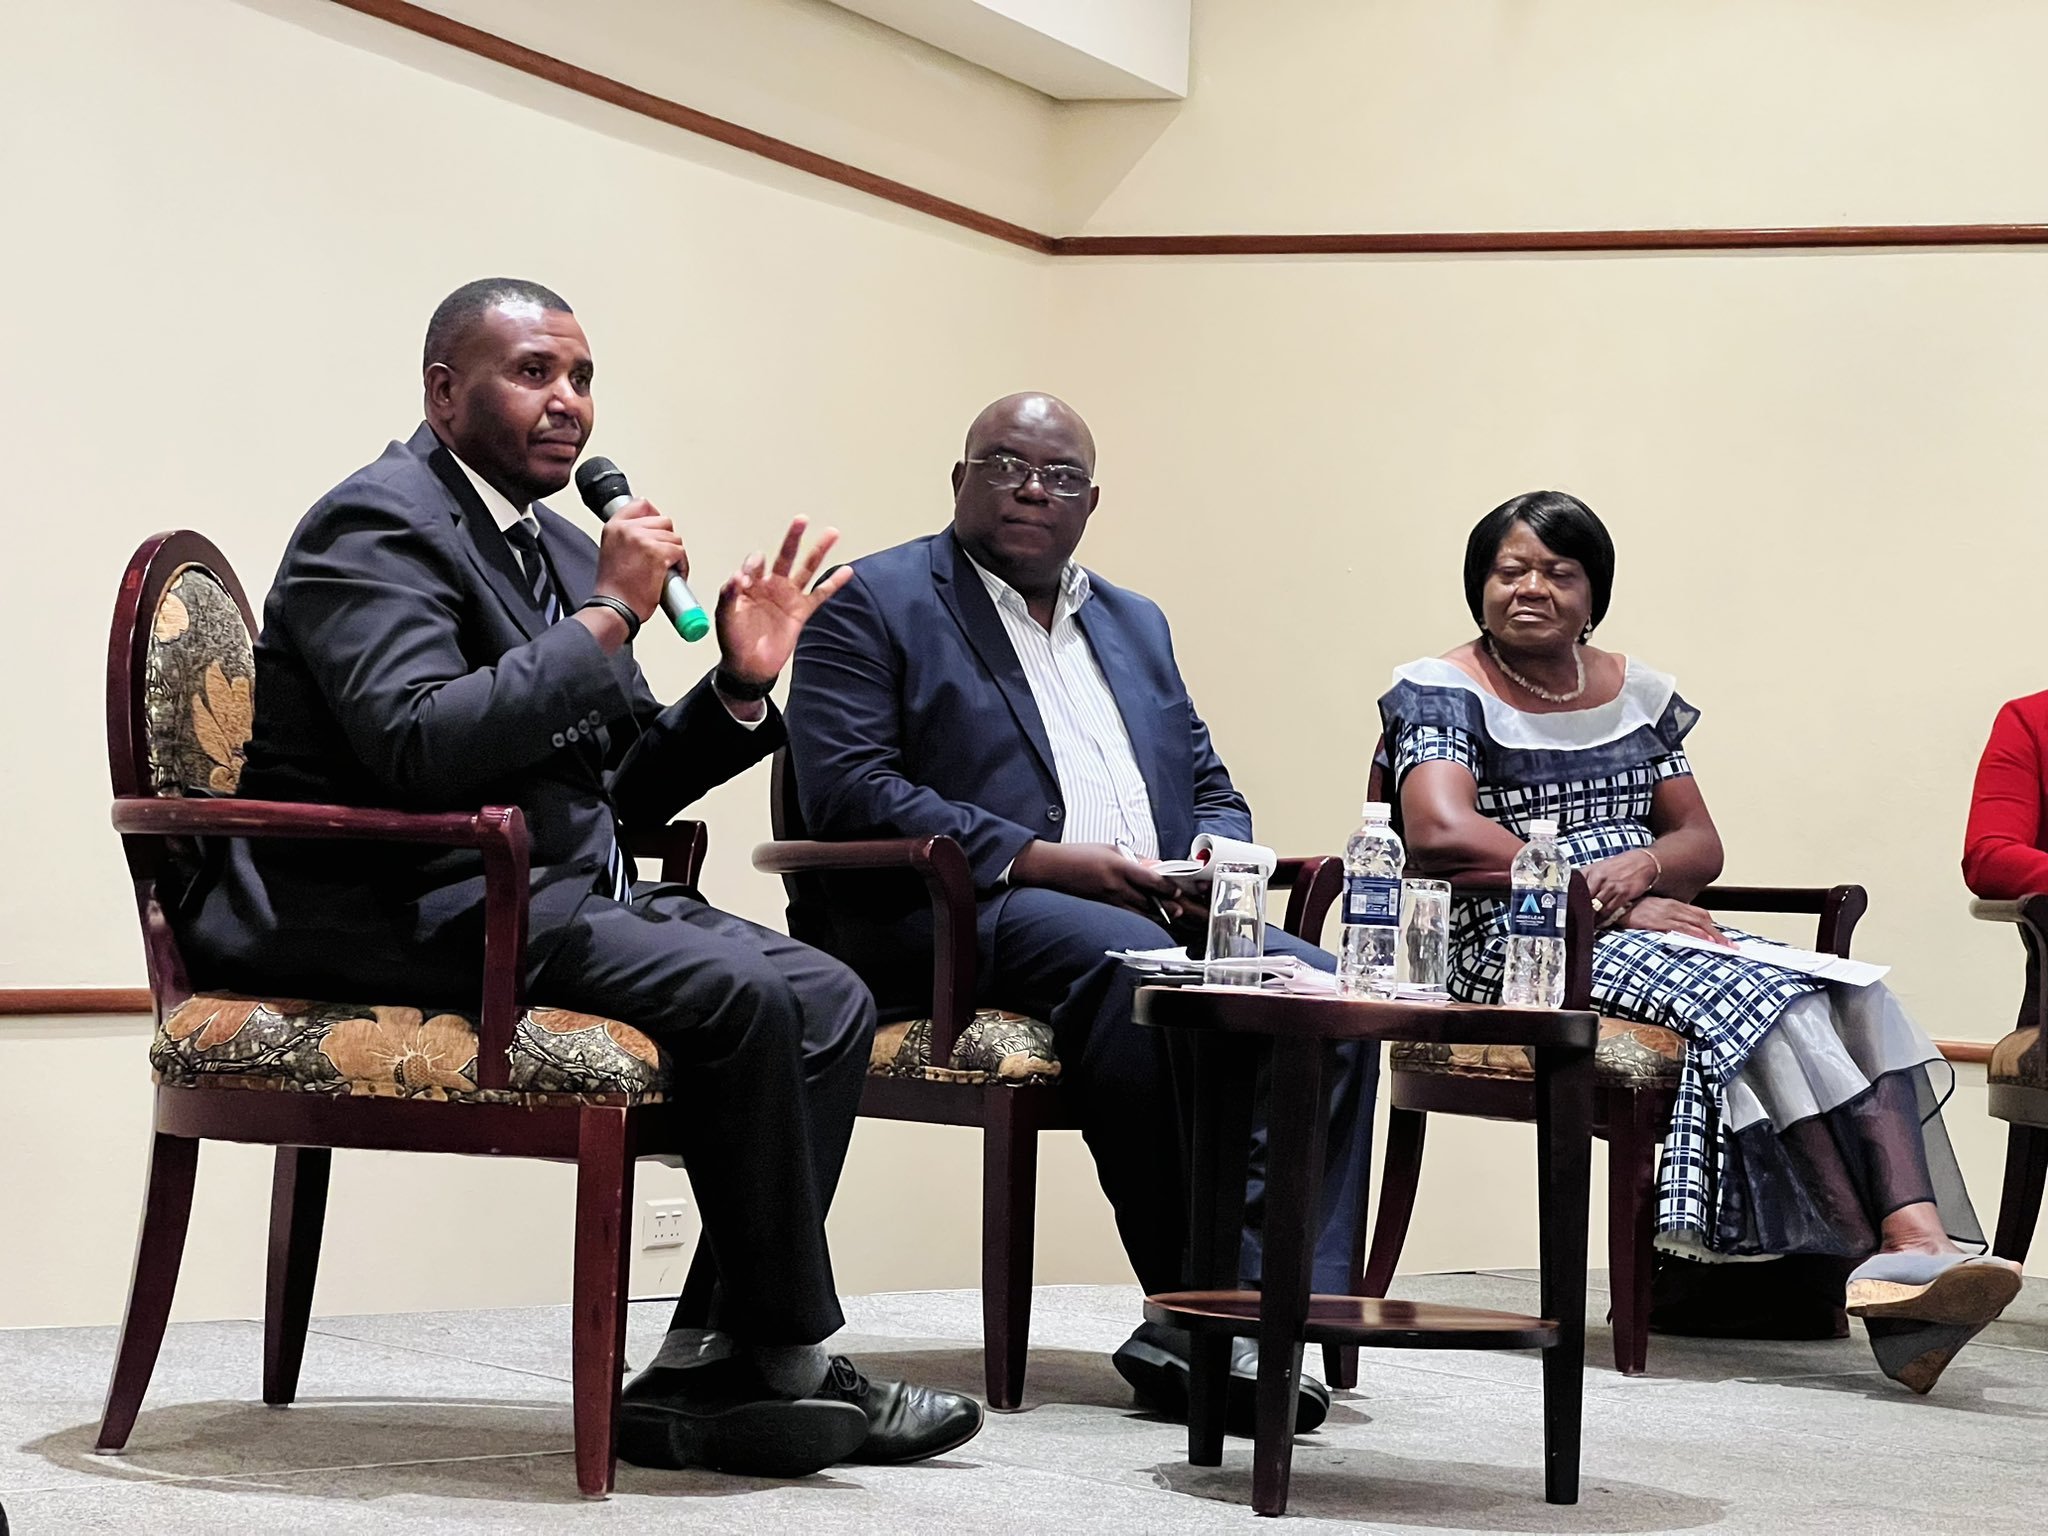 Panel discussion on BOT in Zambia during the 2023 Summit for Democracy. Photo: TI Zambia